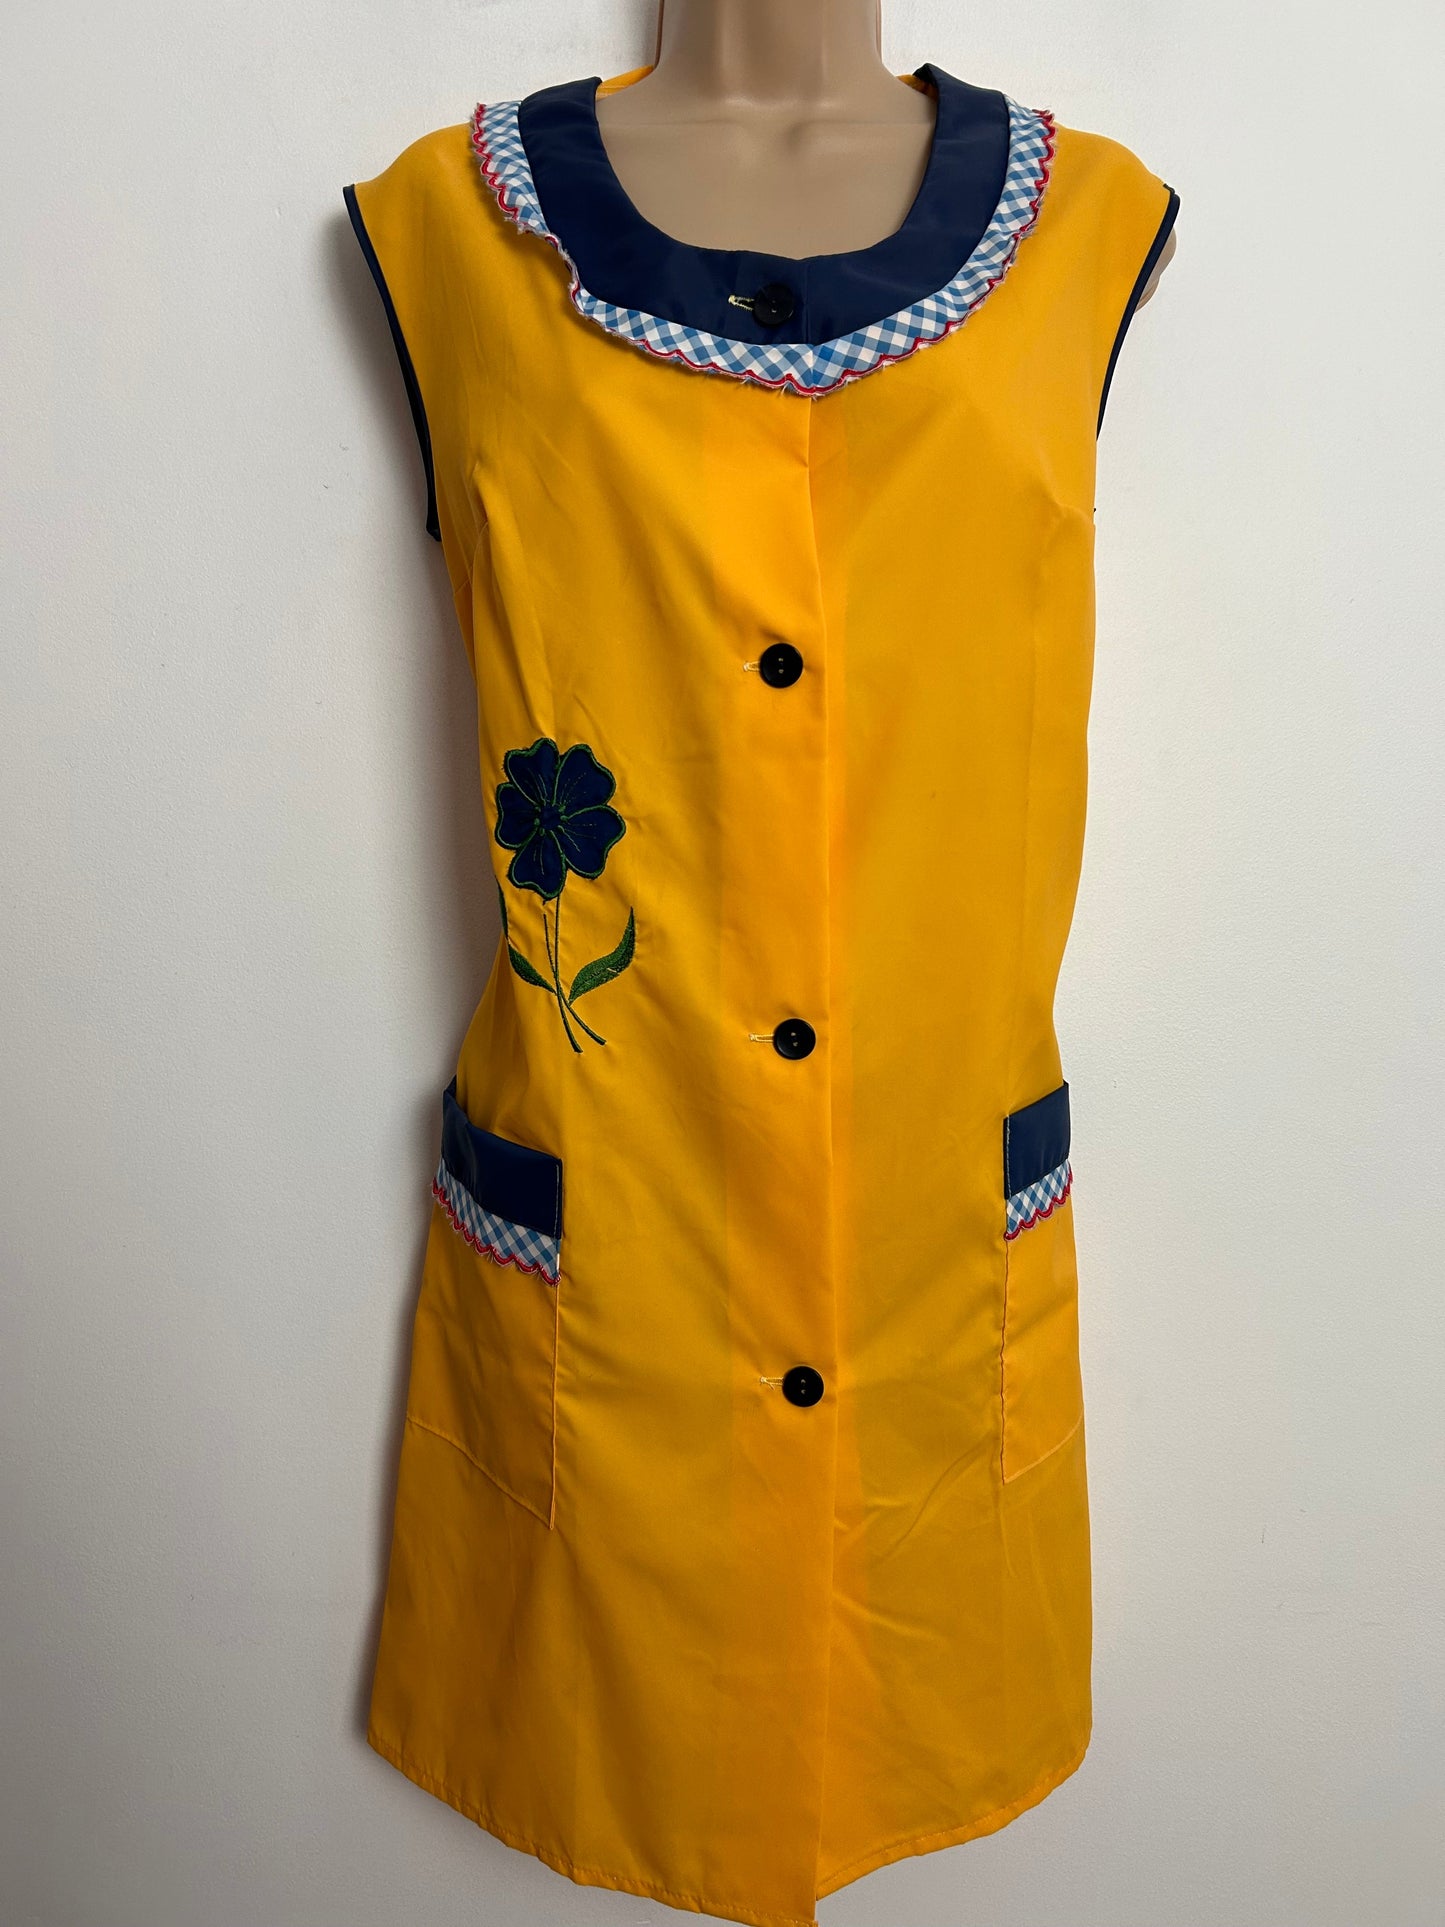 Vintage 1960s Up To Size 12 Mustard Yellow & Navy Blue Floral Applique Apron Dress House Dress